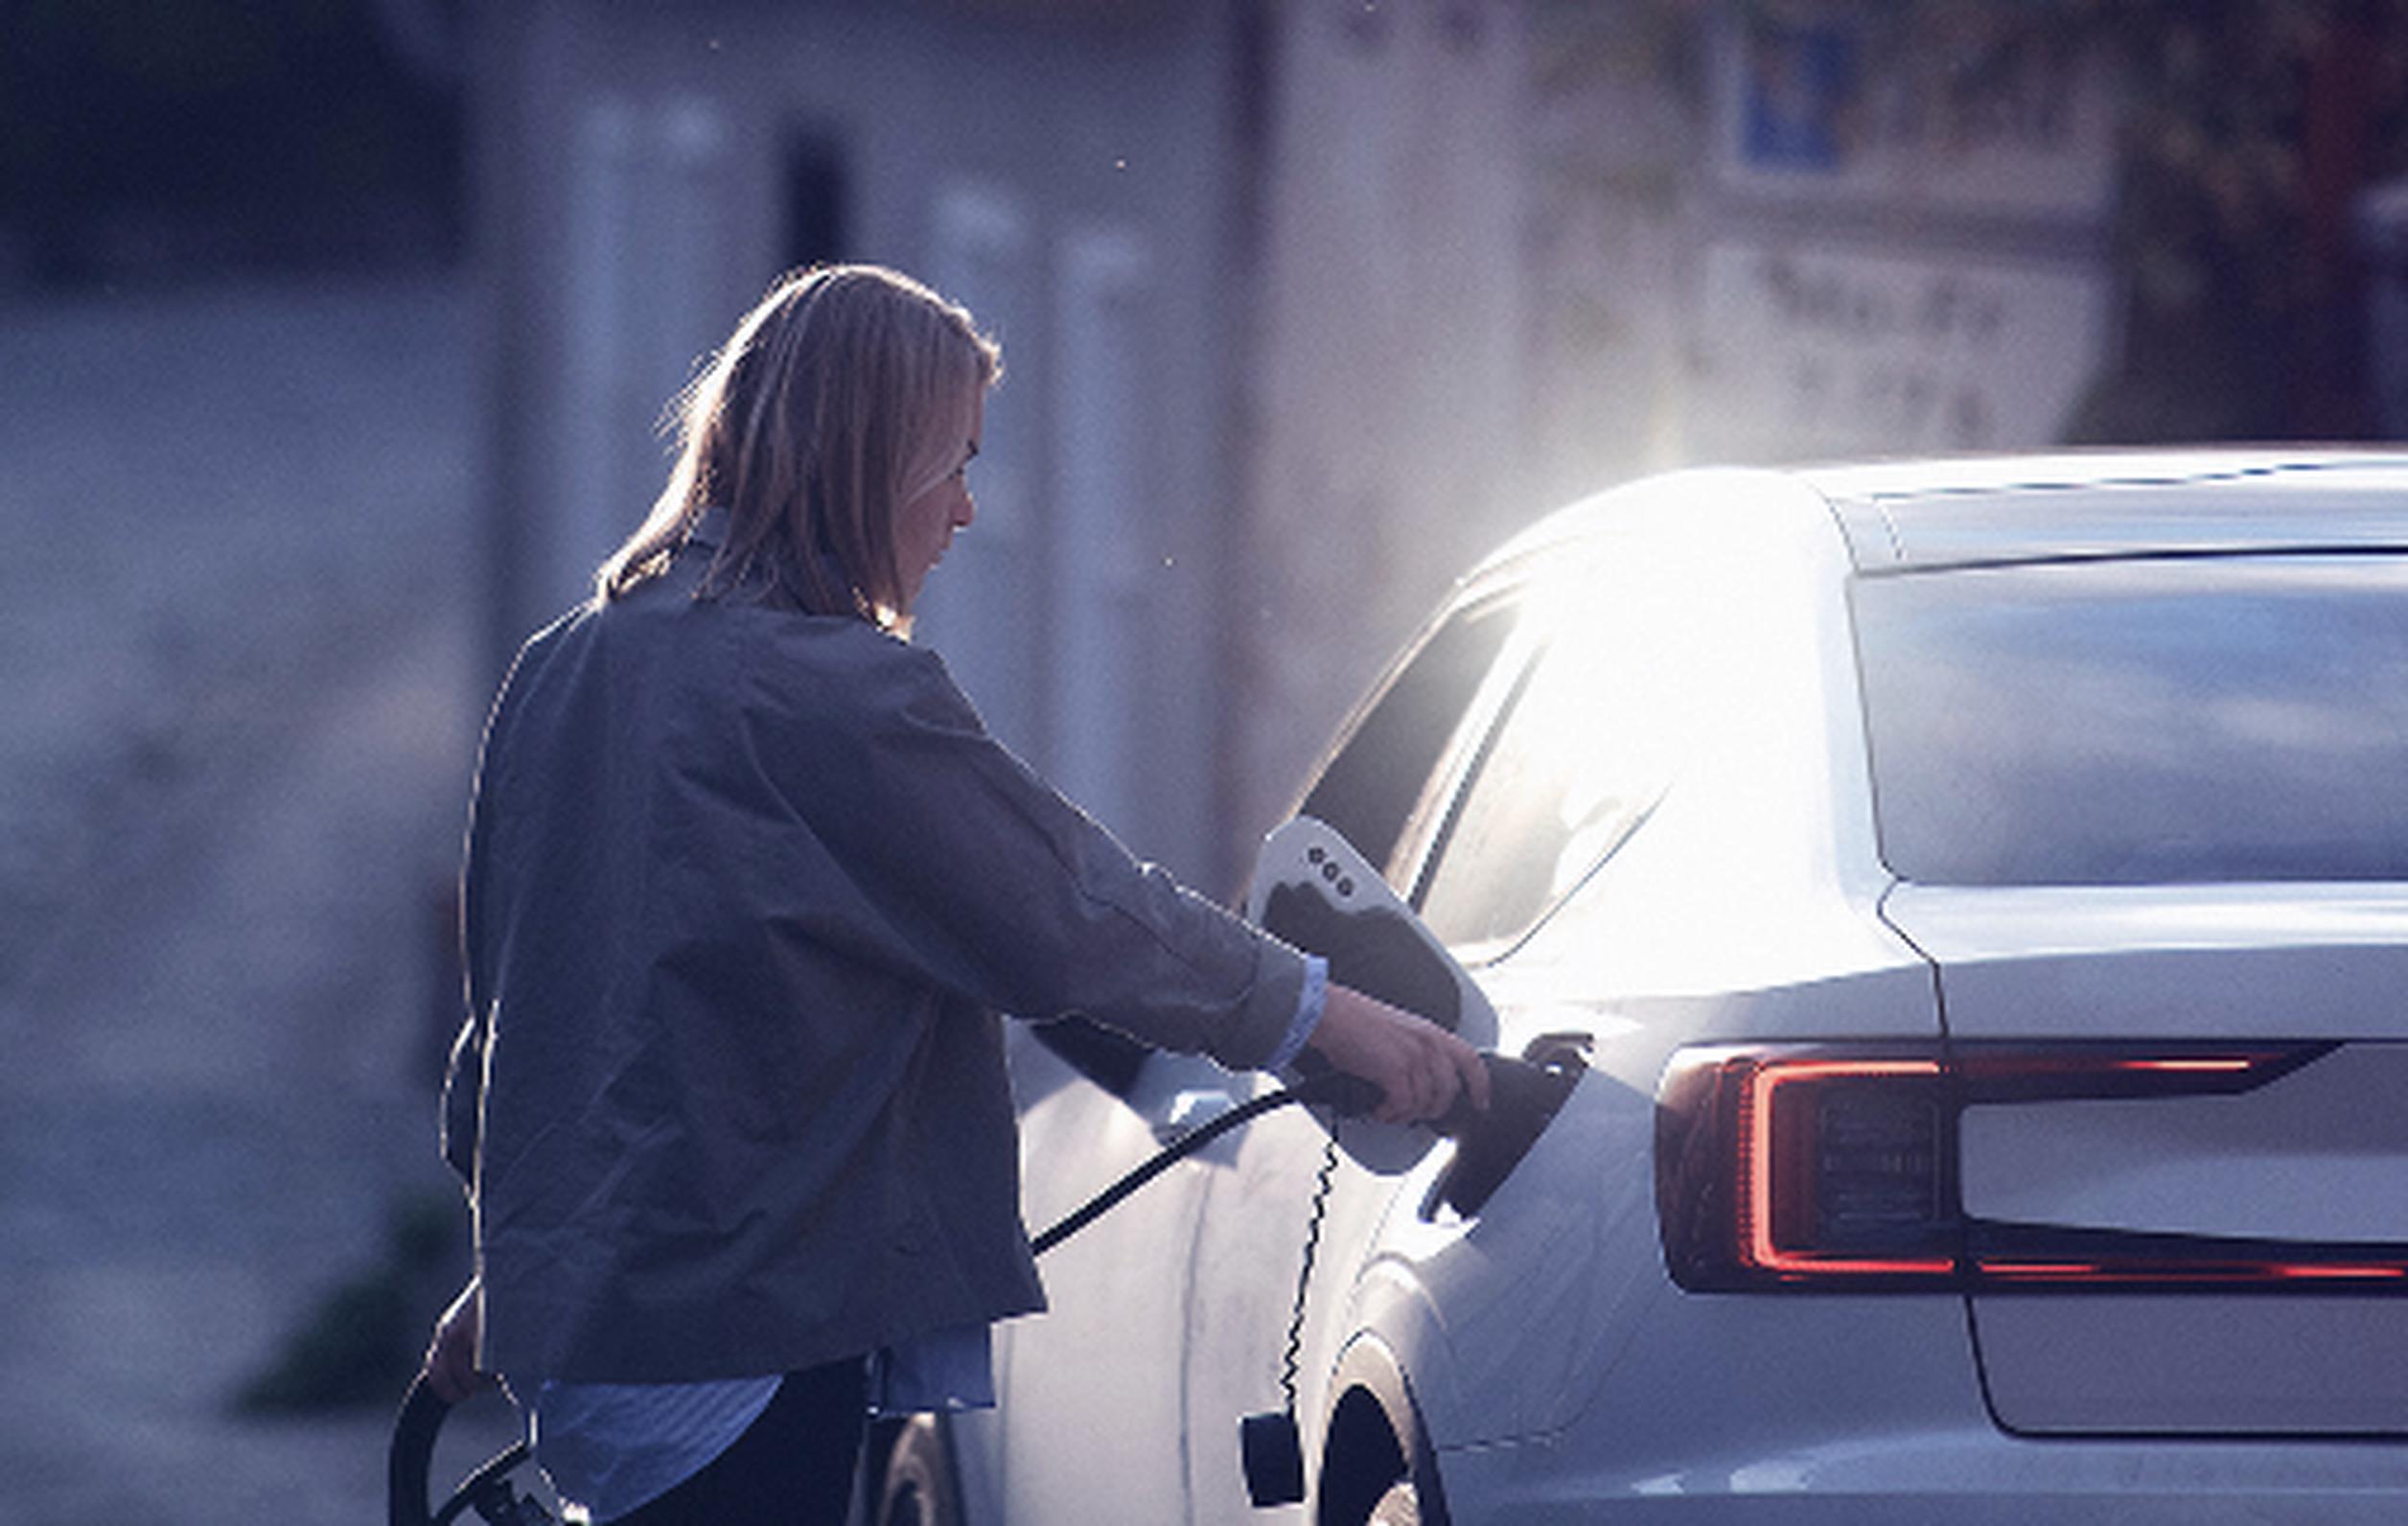 Over 1.5 million drivers are connected to Plugsurfing through the various apps and services it creates for its partners, including a network of over 500,000 chargepoints across Europe and the UK